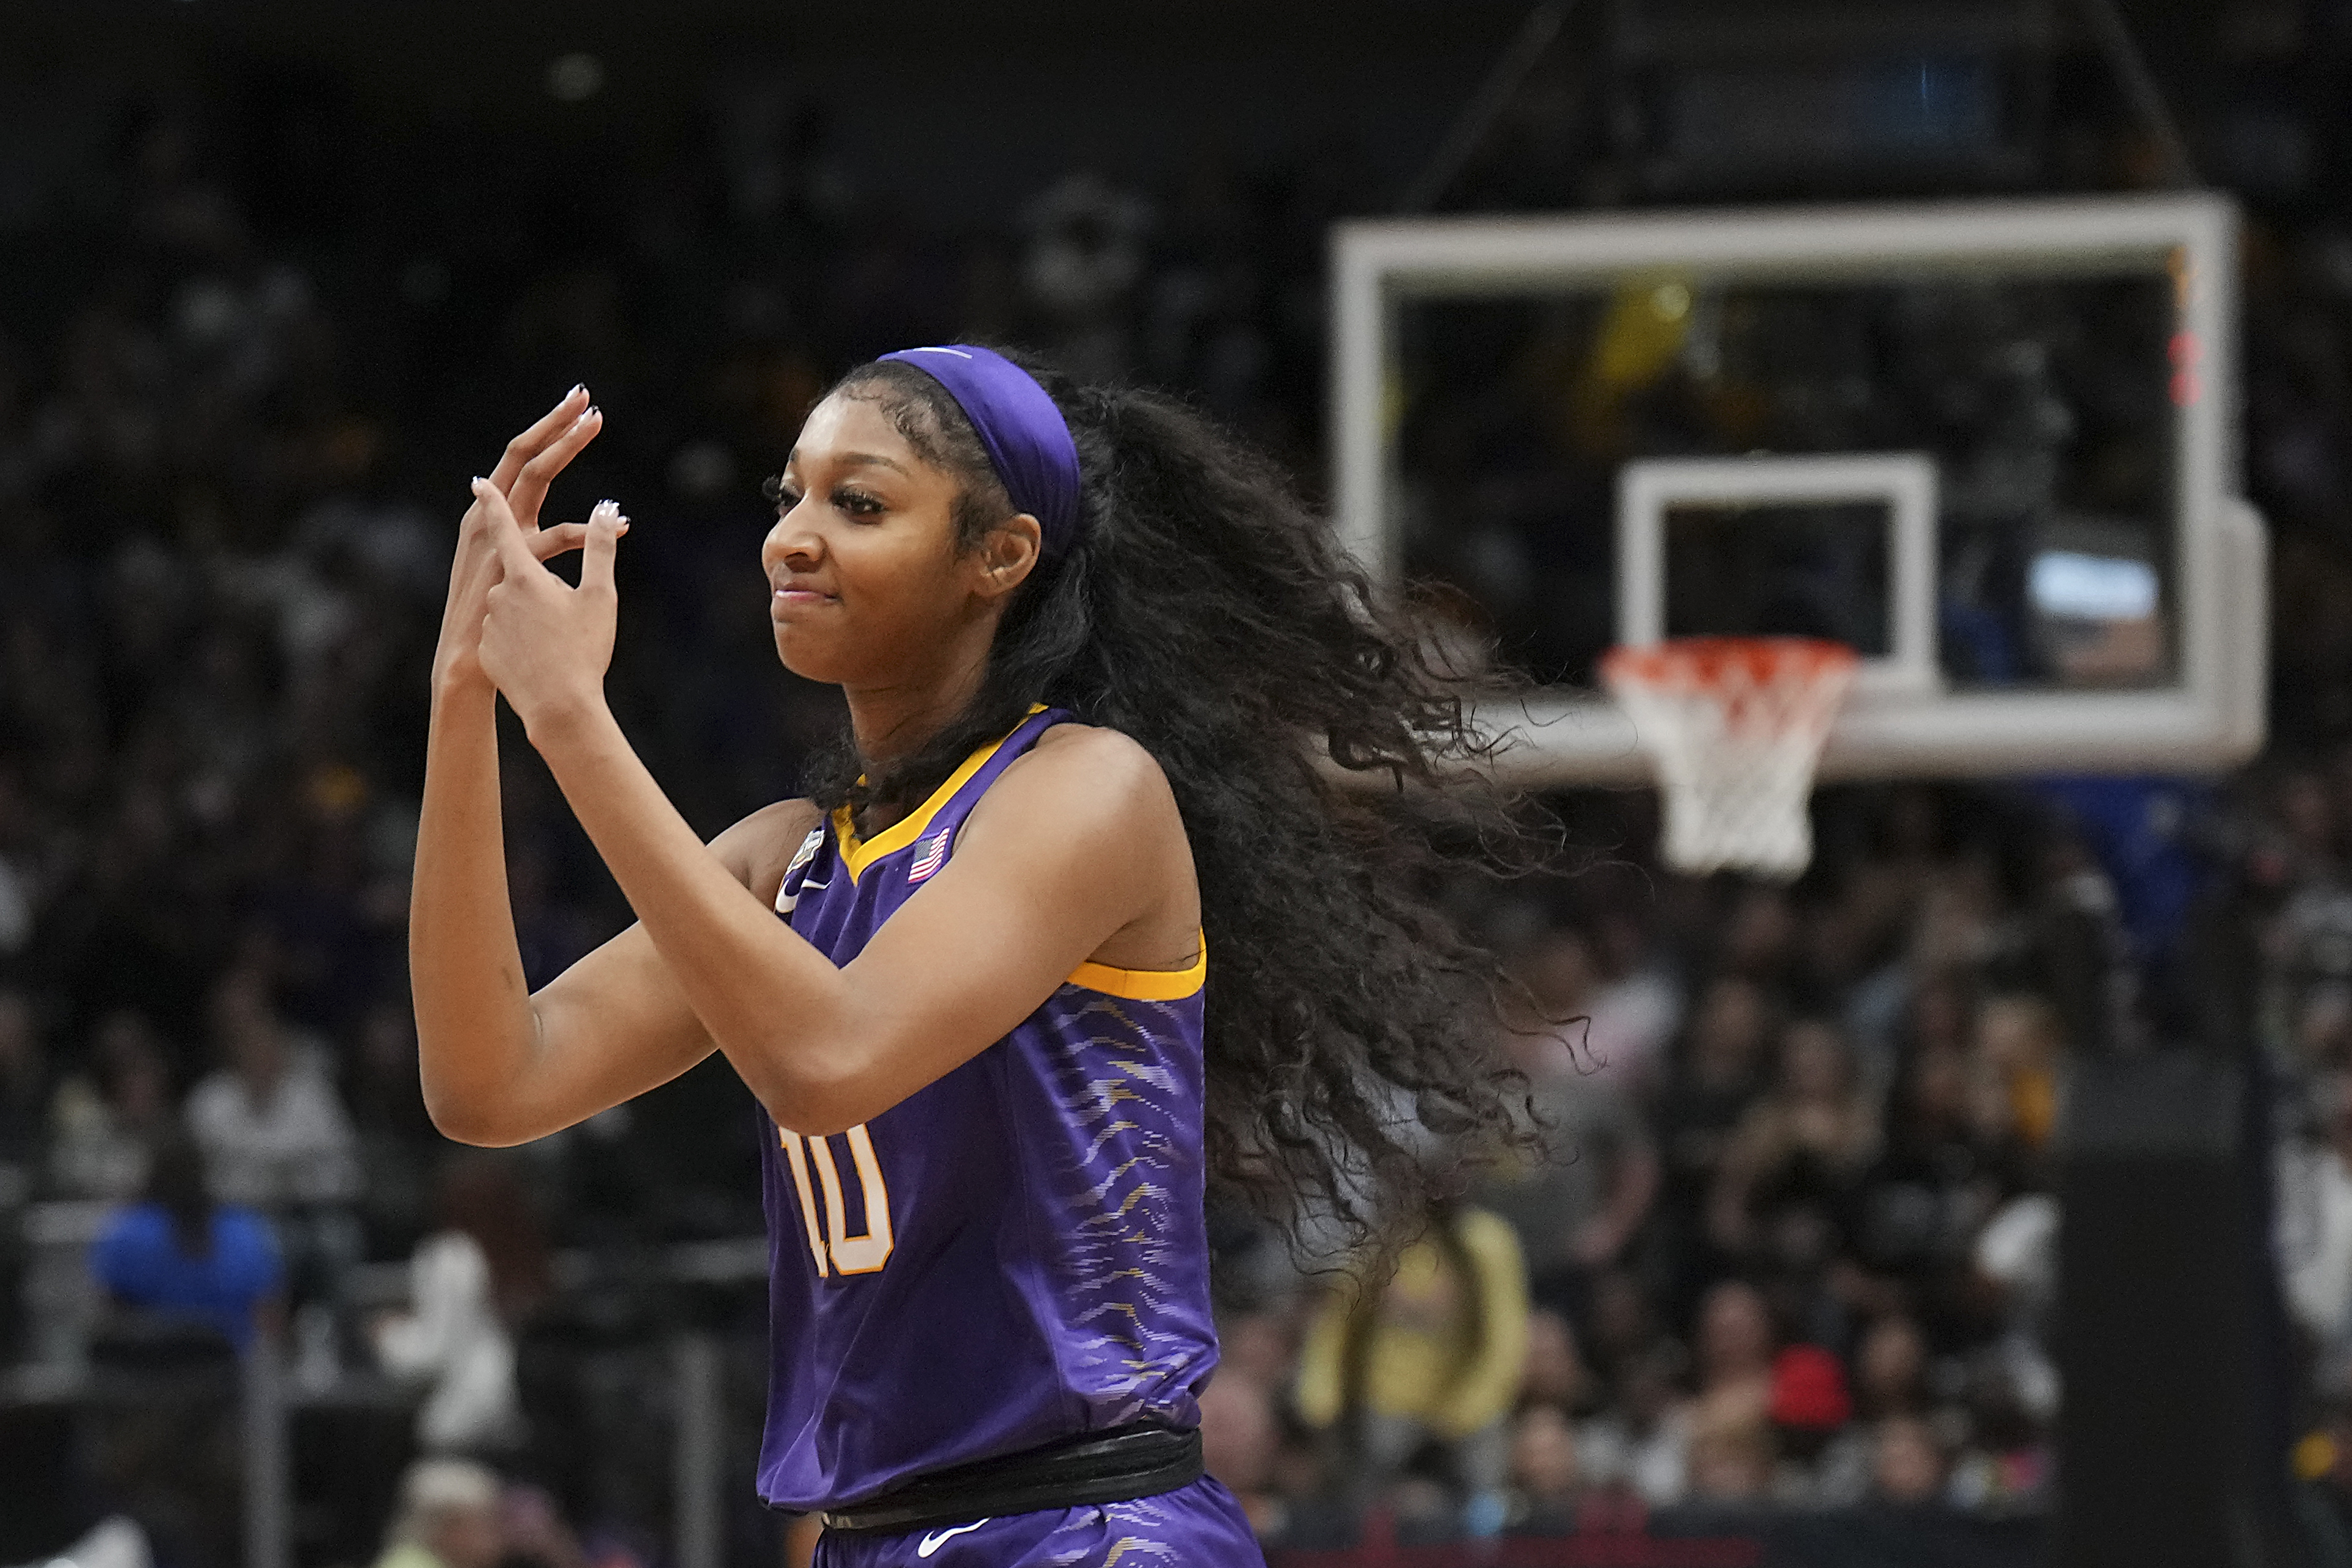 5 things to know about Angel Reese taunting Caitlin Clark during LSU vs.  Iowa